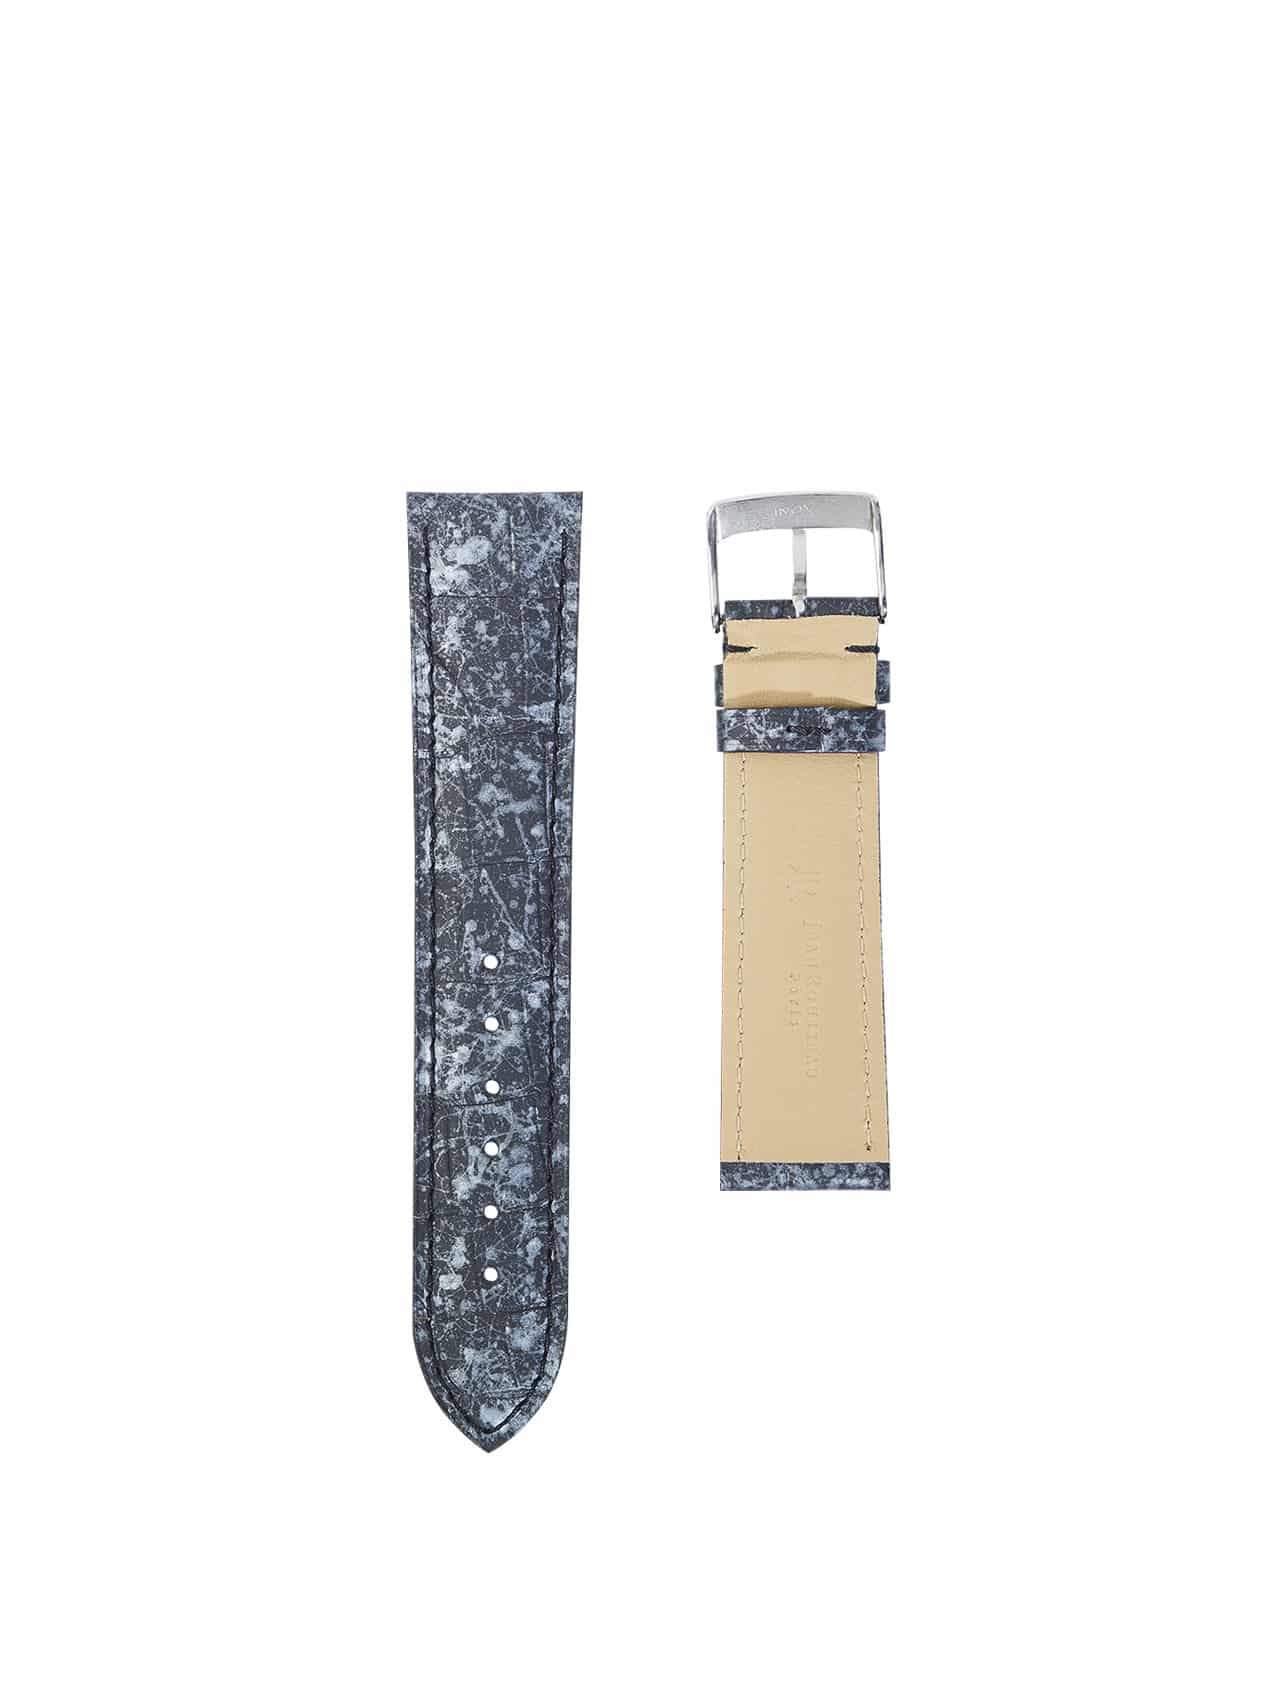 Watch strap 3.5 Asteria rubber touch crock silver back